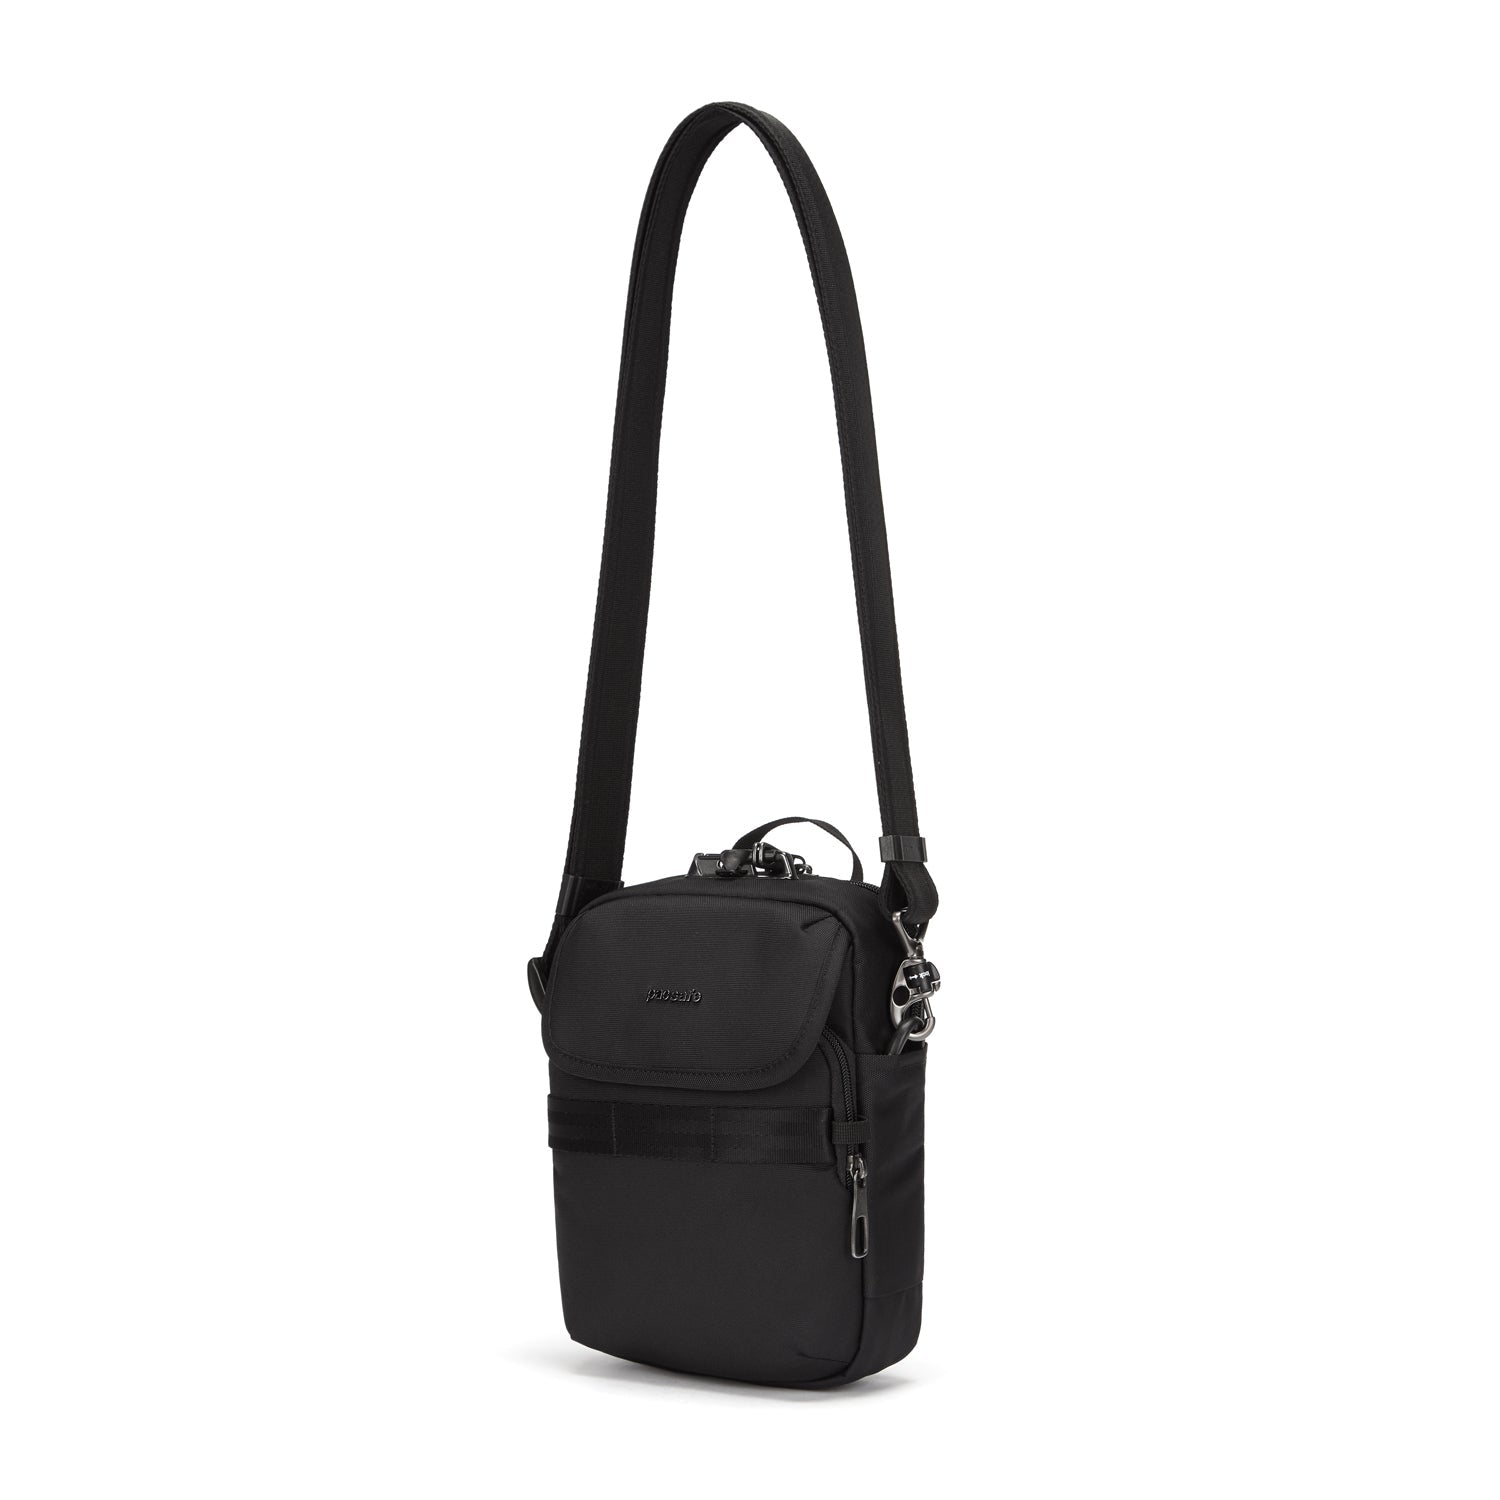 Anti-theft Crossbody Bag  Stylesafe in Black - Pacsafe – Official APAC  Store